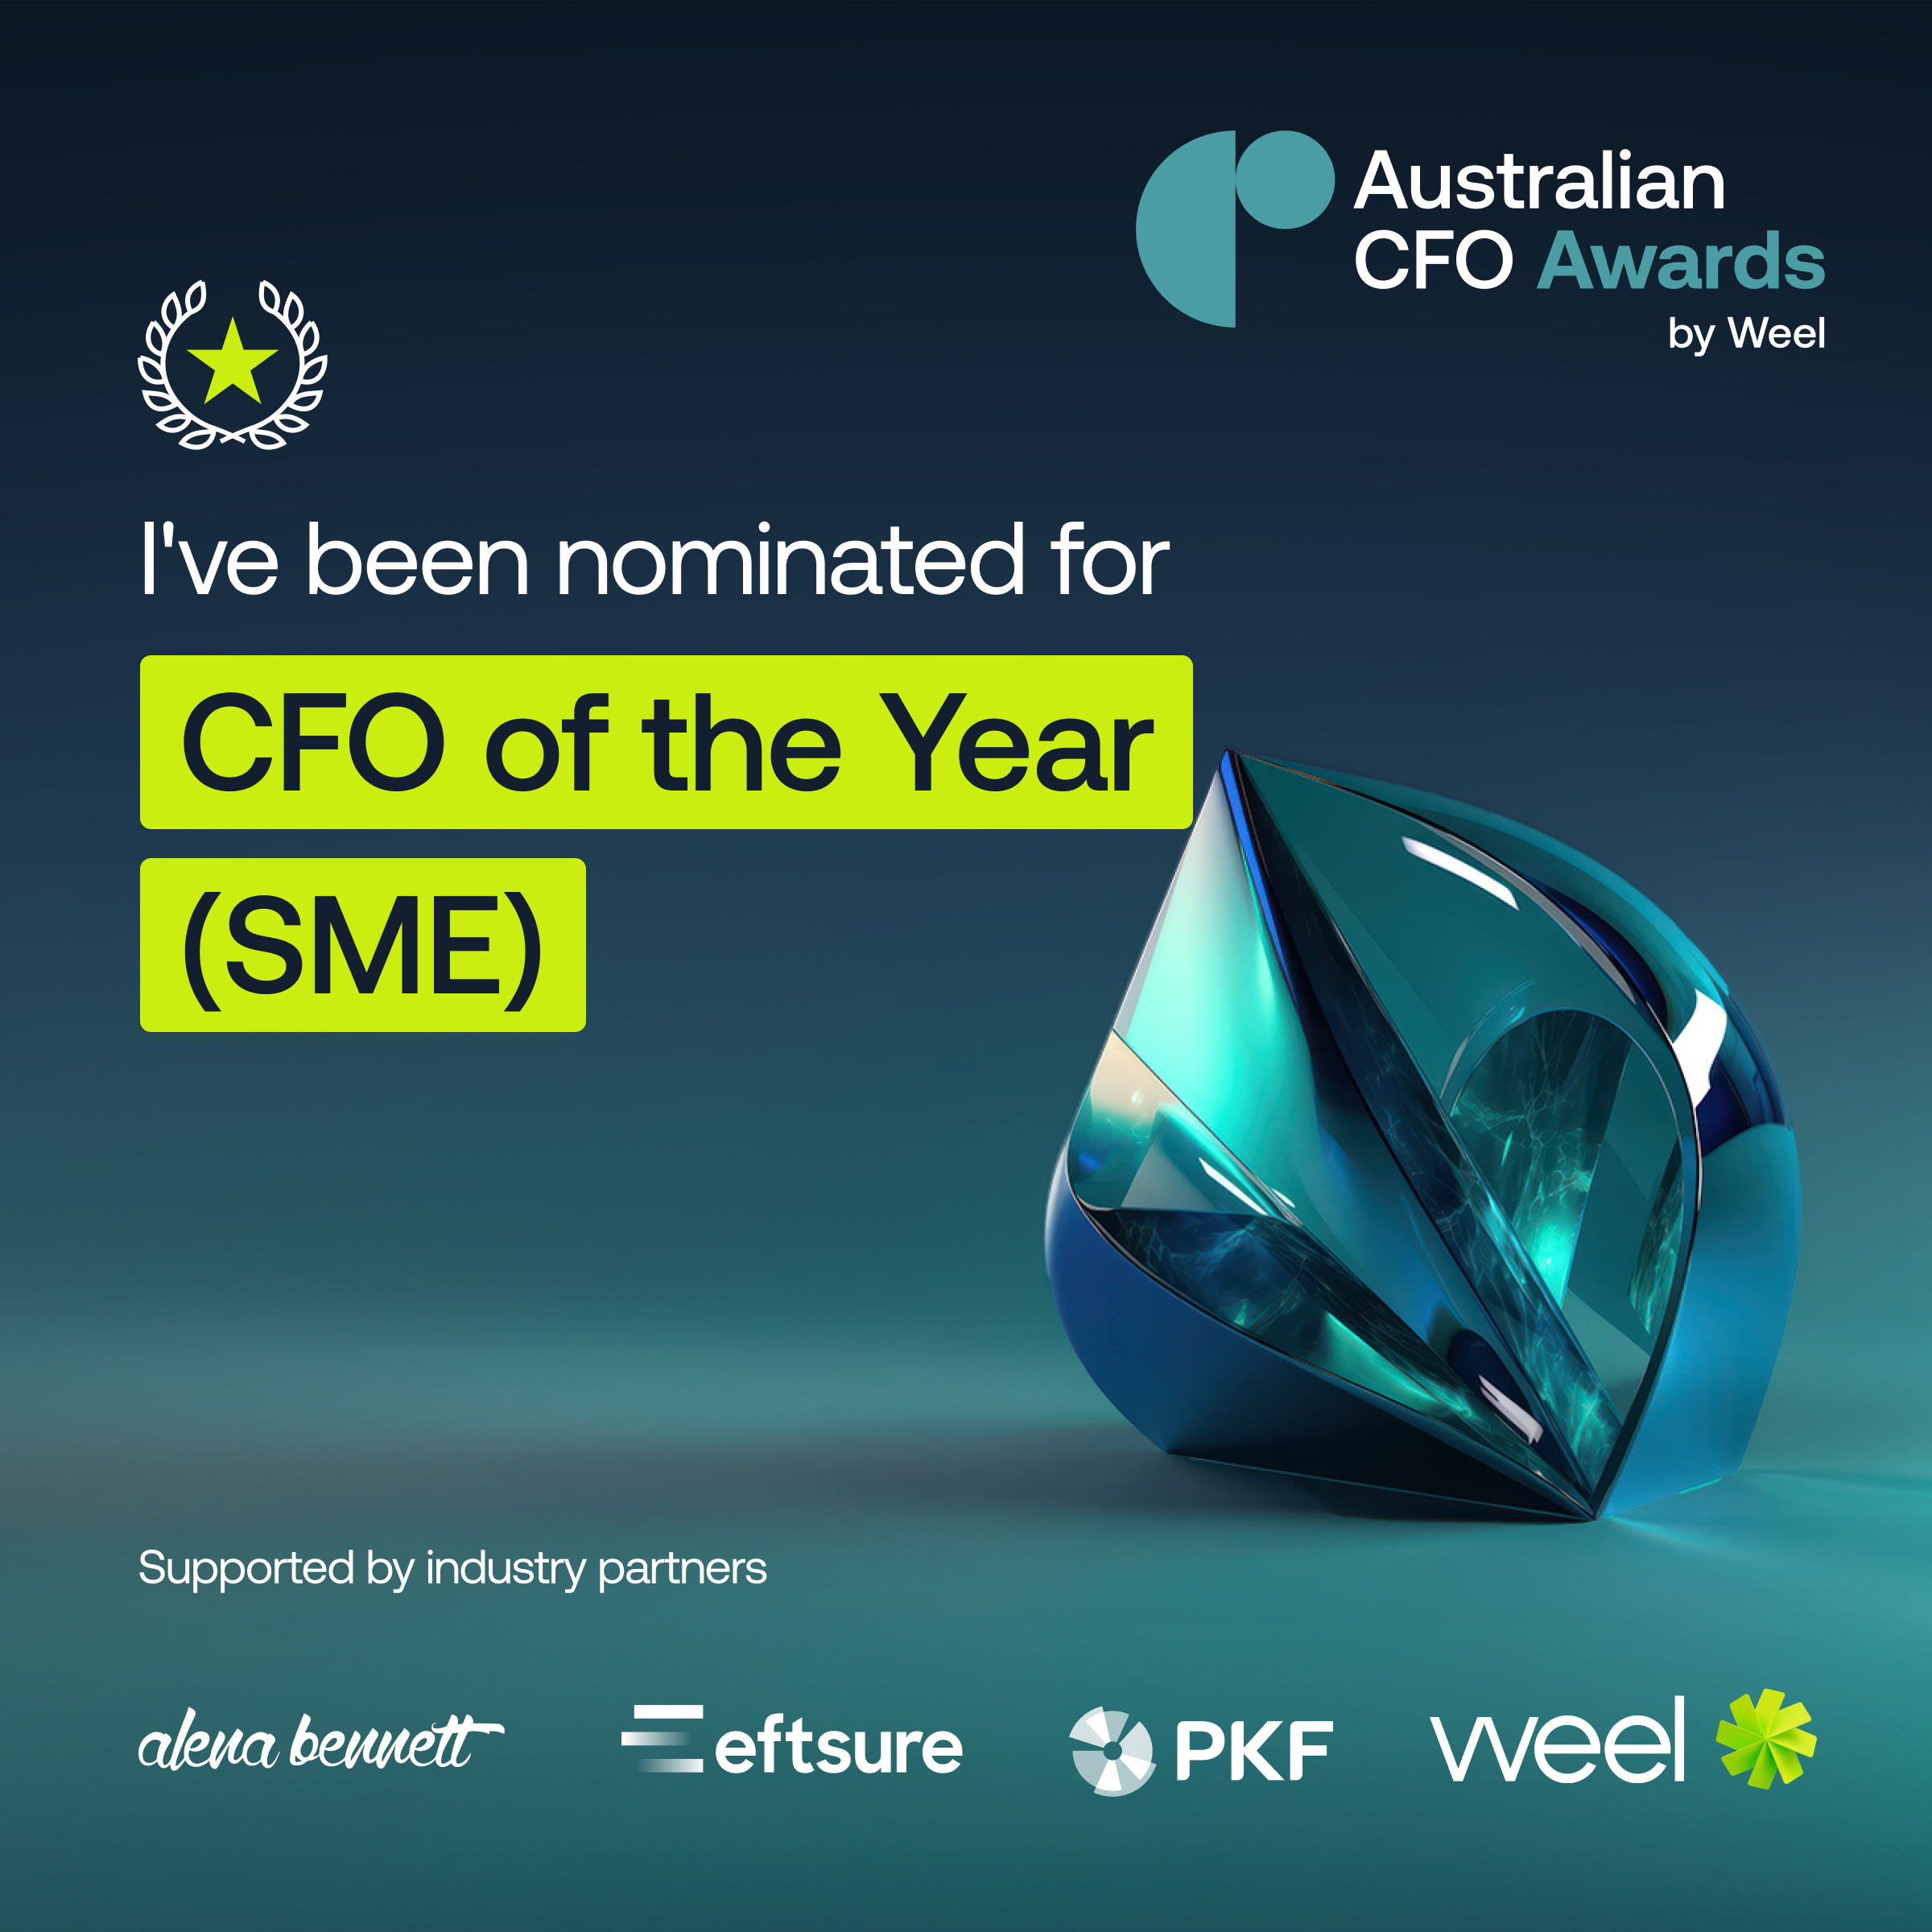 Celebrating Excellence: Carly Chant’s Nomination for CFO of the Year (SME) at the Australian CFO Awards